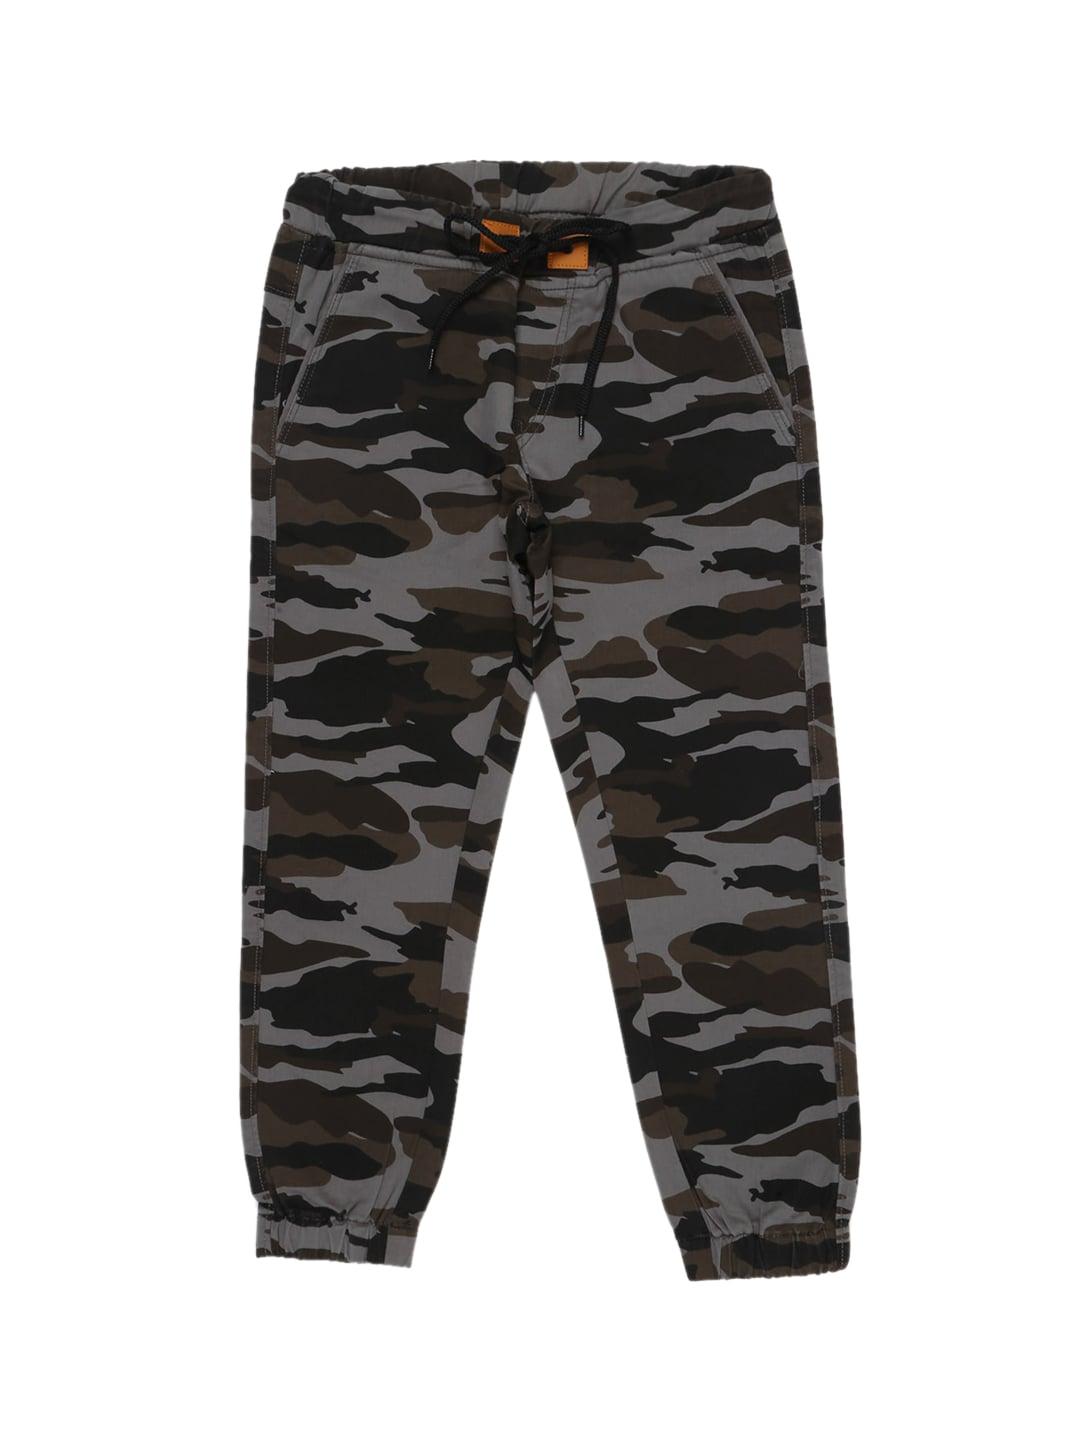 Urbano Juniors Boys Grey Camouflage Printed Slim Fit Joggers Trousers